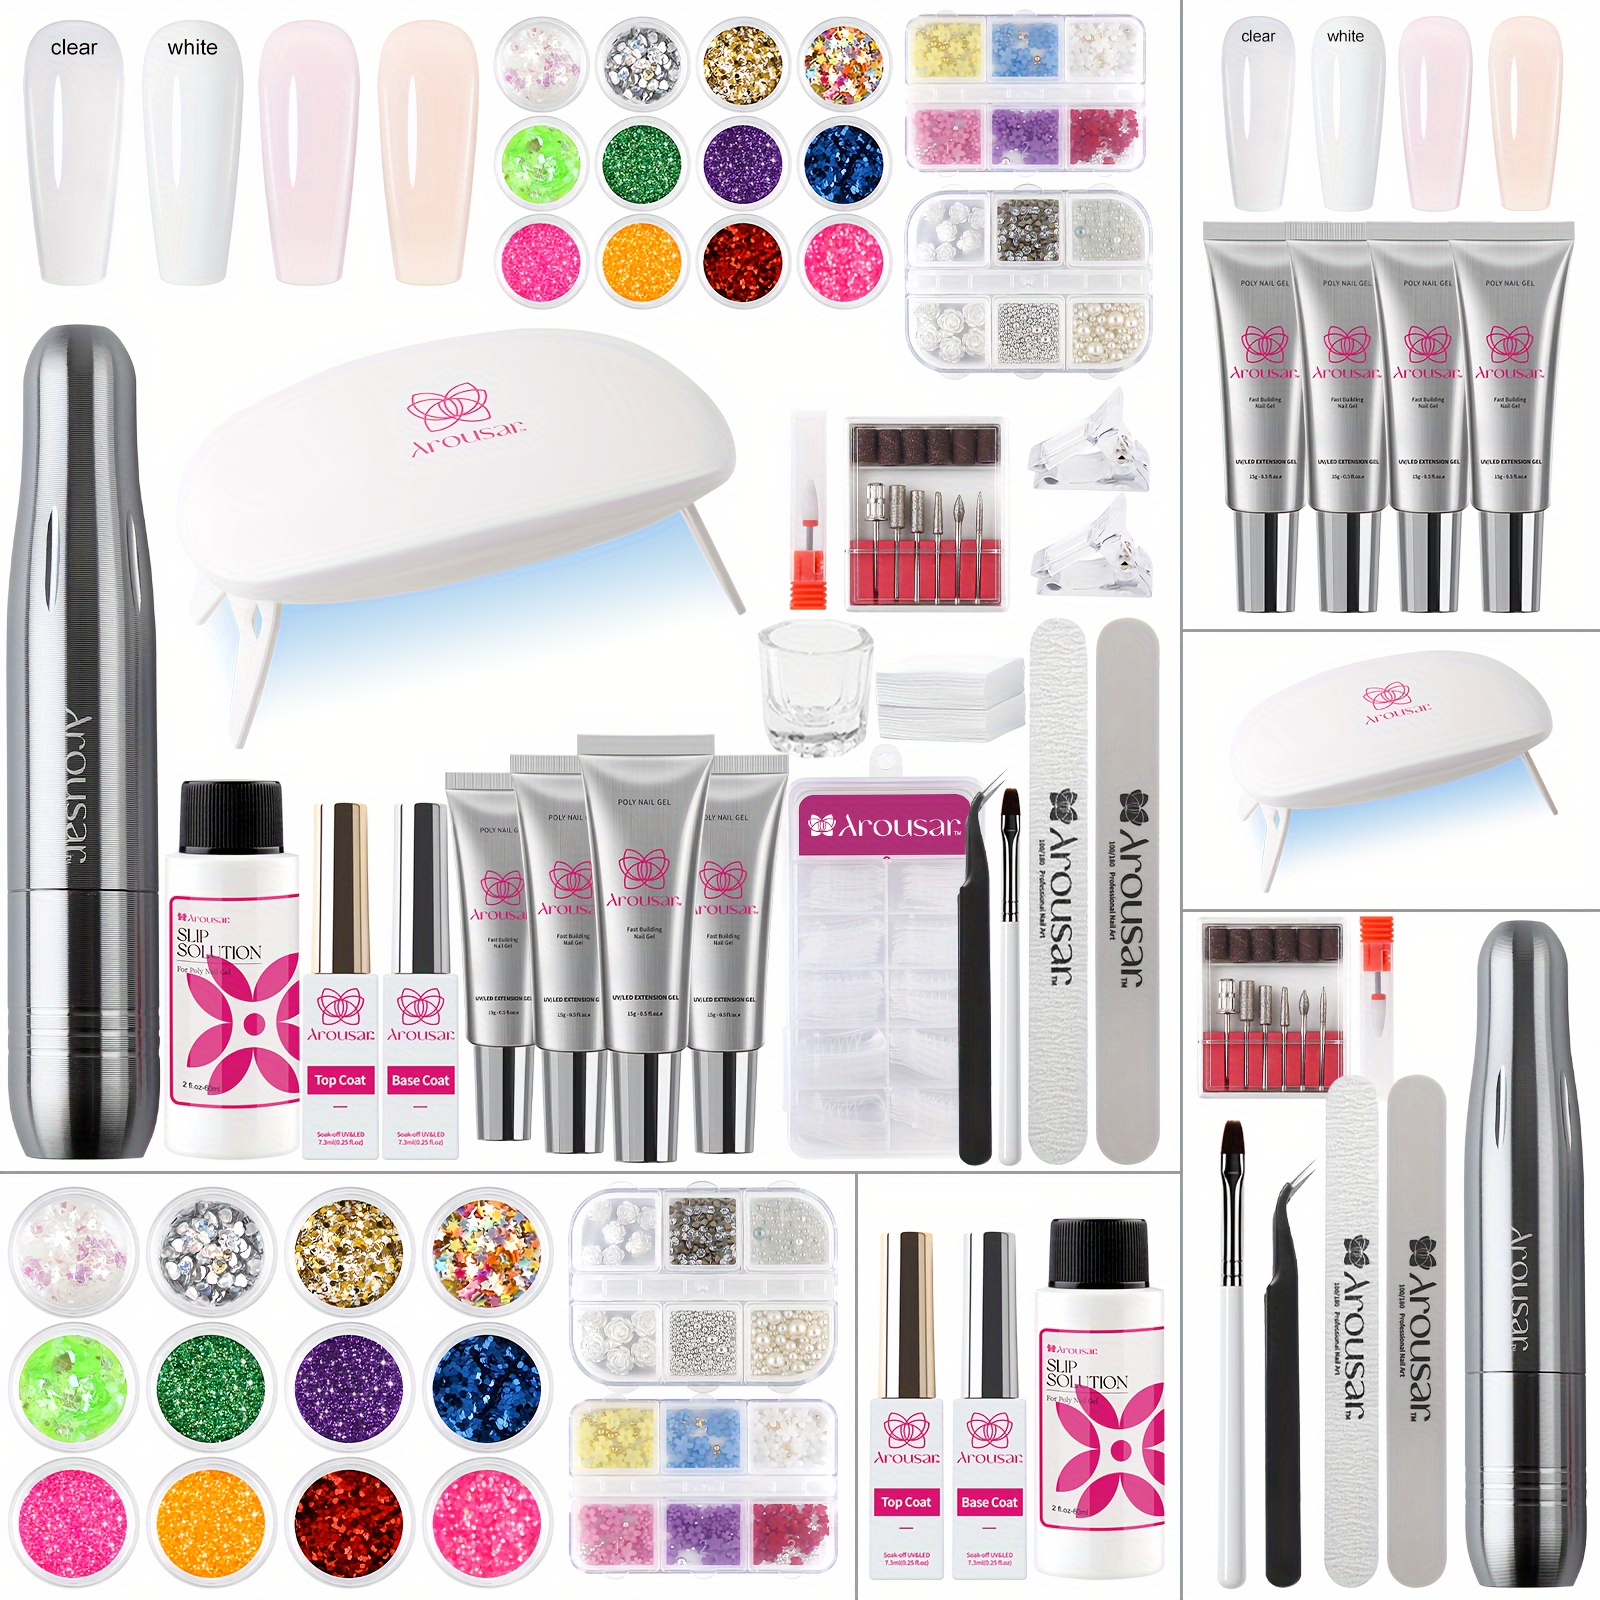 

Nail Gel Kit, Nail Extension Gel Set, Home Manicure Supplies, Professional Quality, Includes Clear And White Gel, Glitter, Tools & Accessories